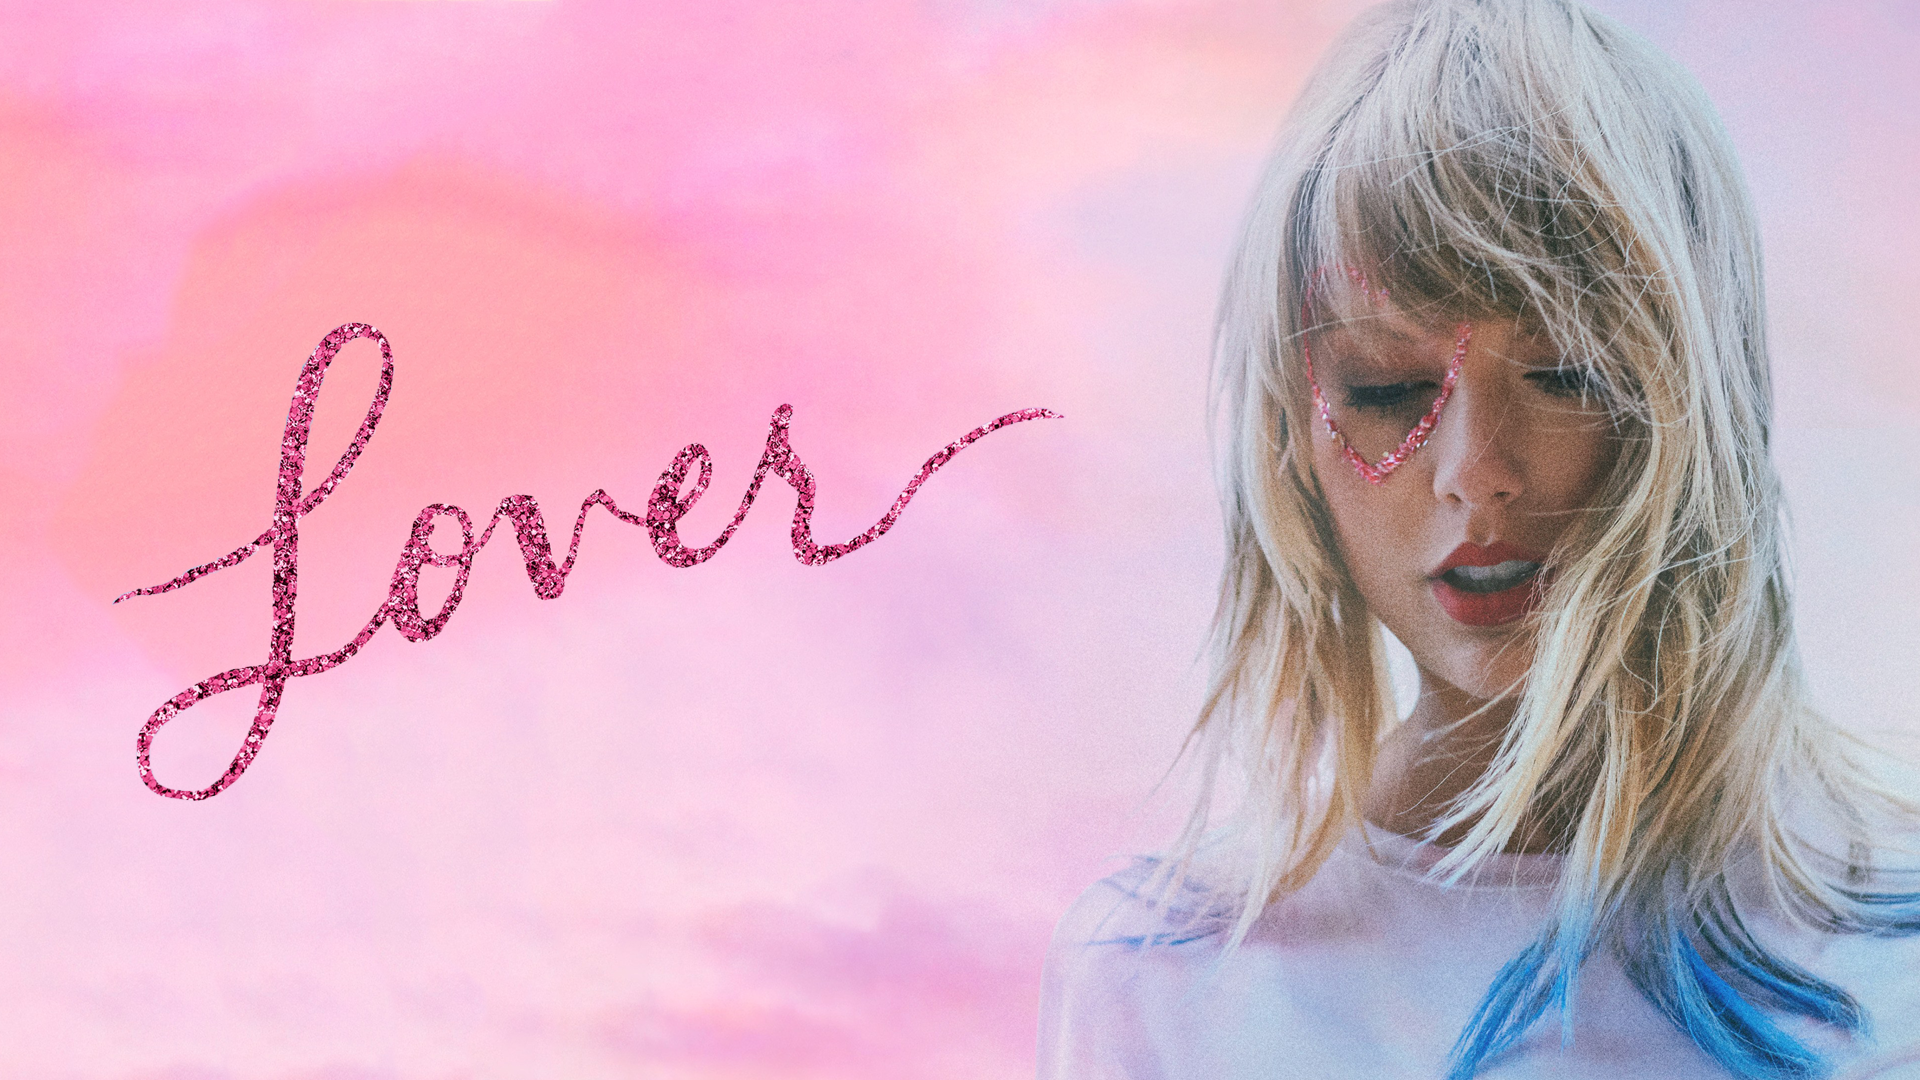 Cant stop listening to YNTCD so I made some Lover wallpapers